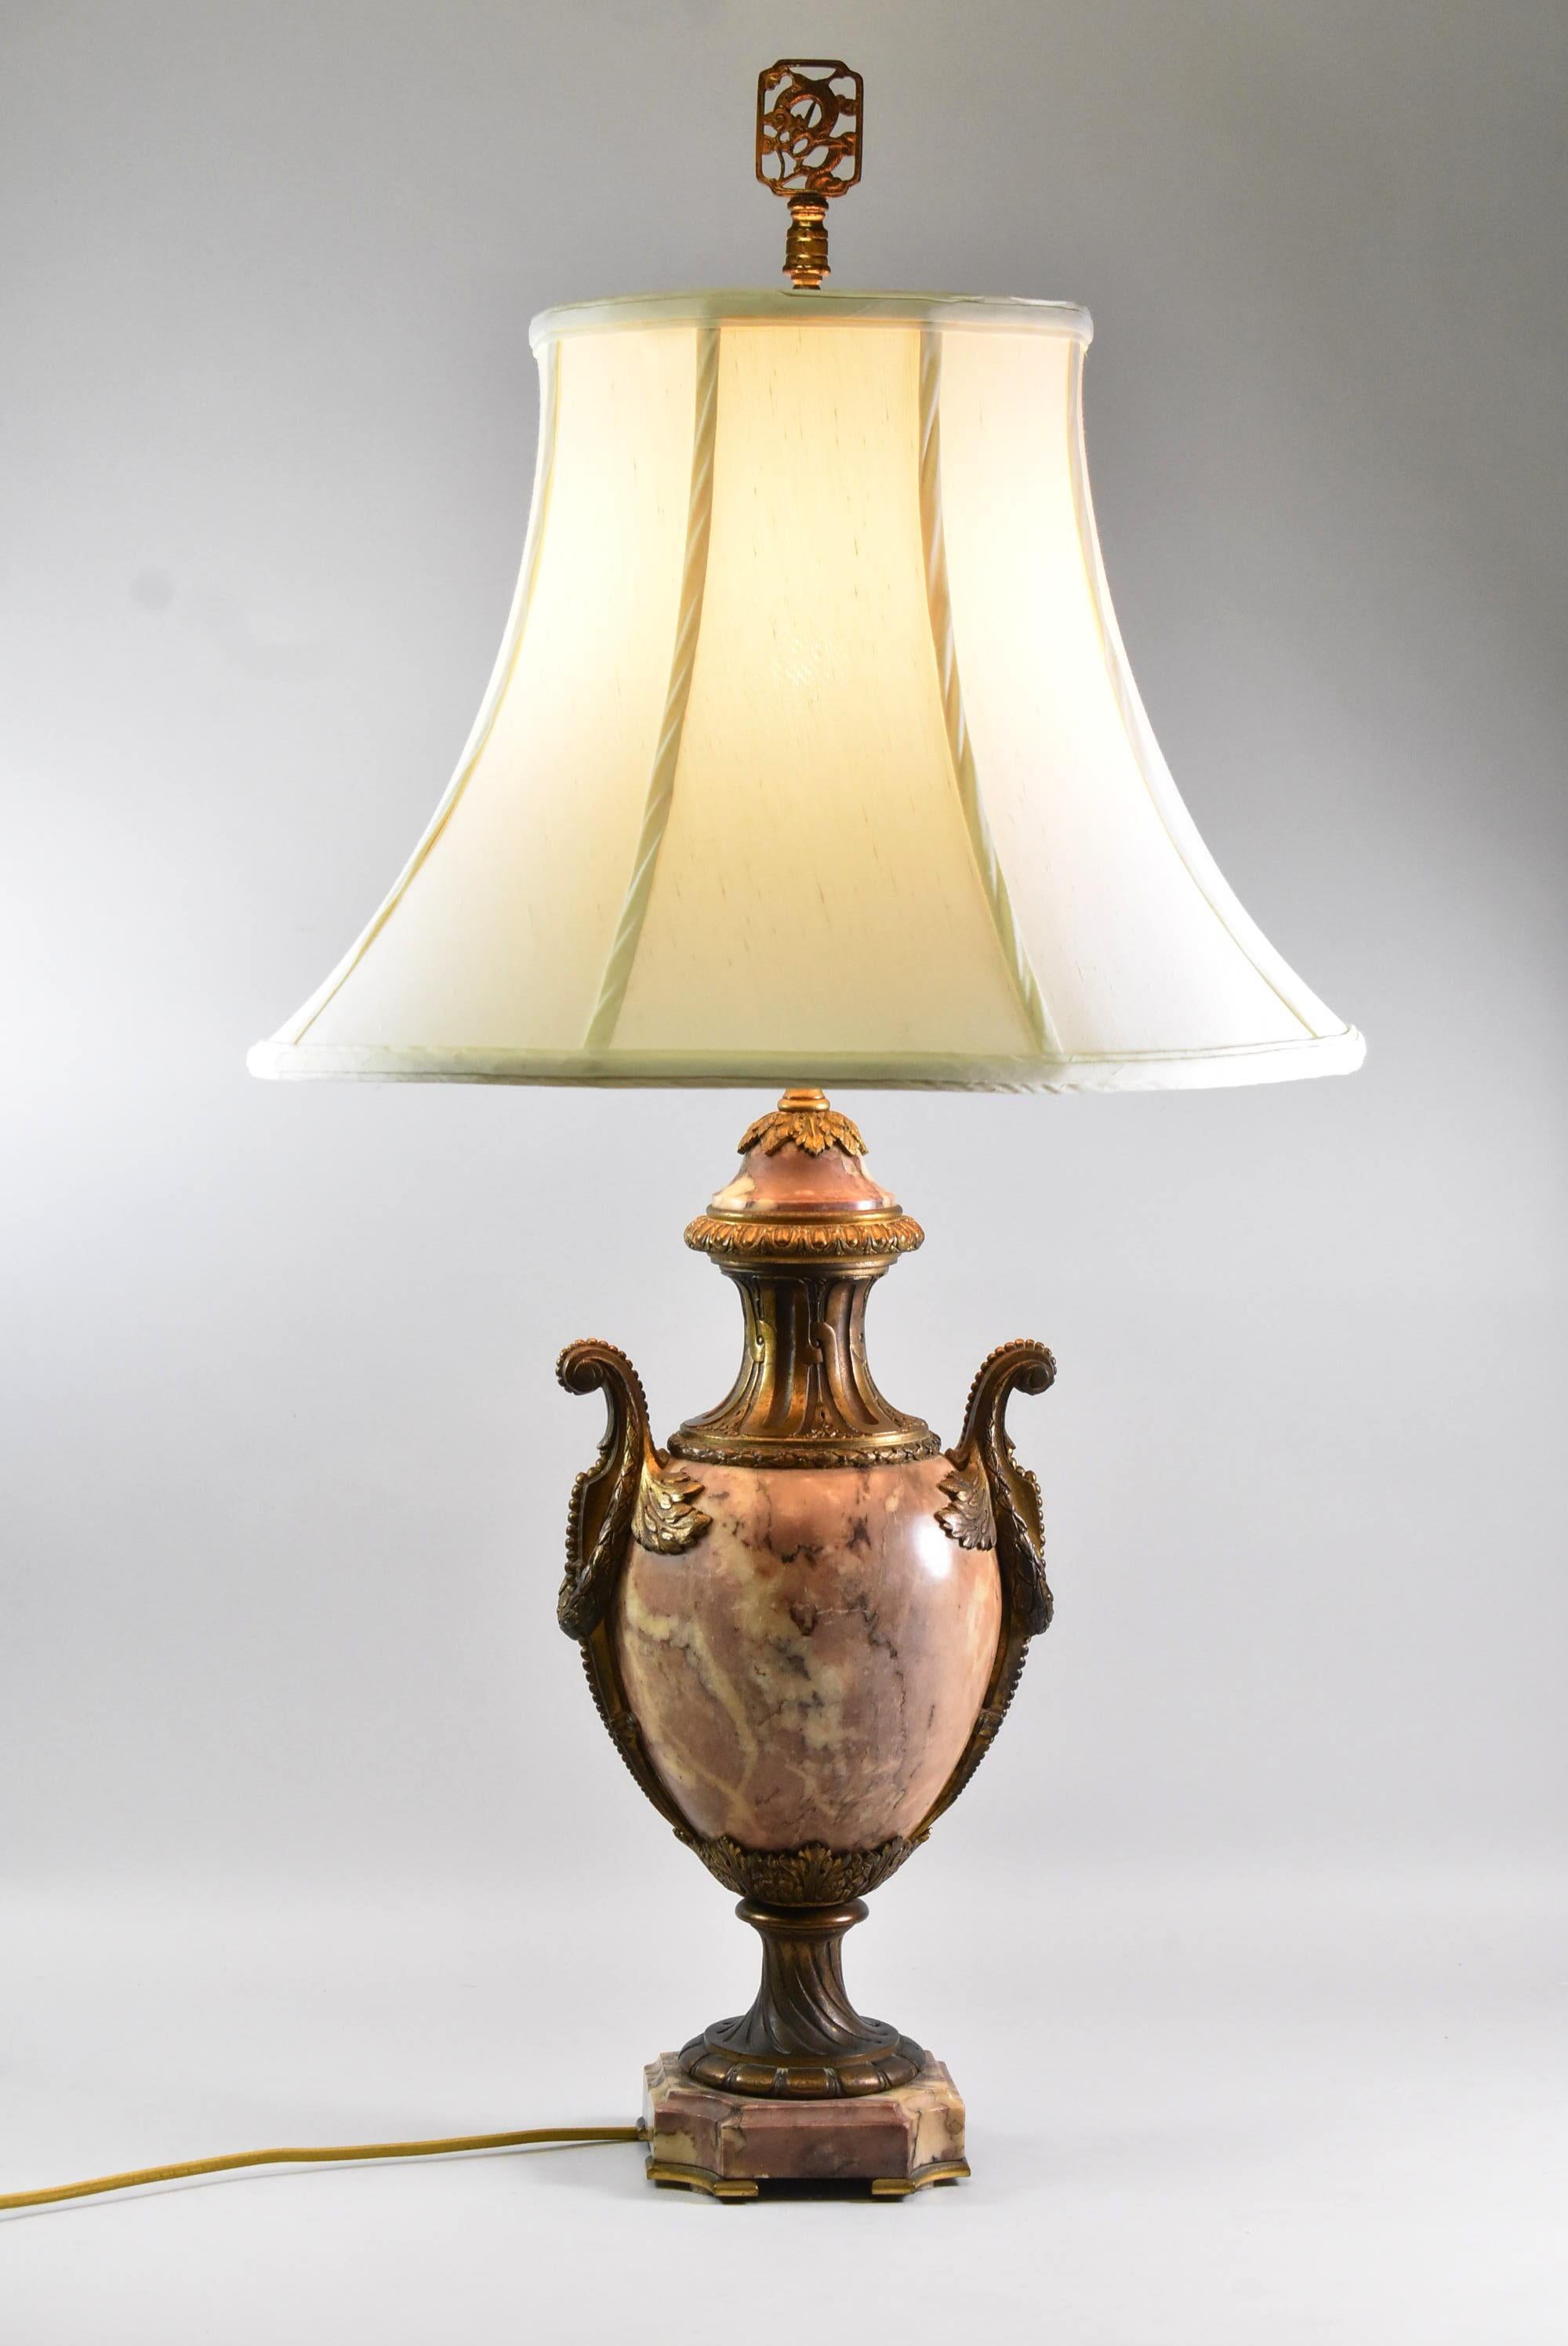 French style marble and brass urn shape table lamp. Mottled marble in shades of mauve, cream burgundy and gray.
Lampshade is not included.